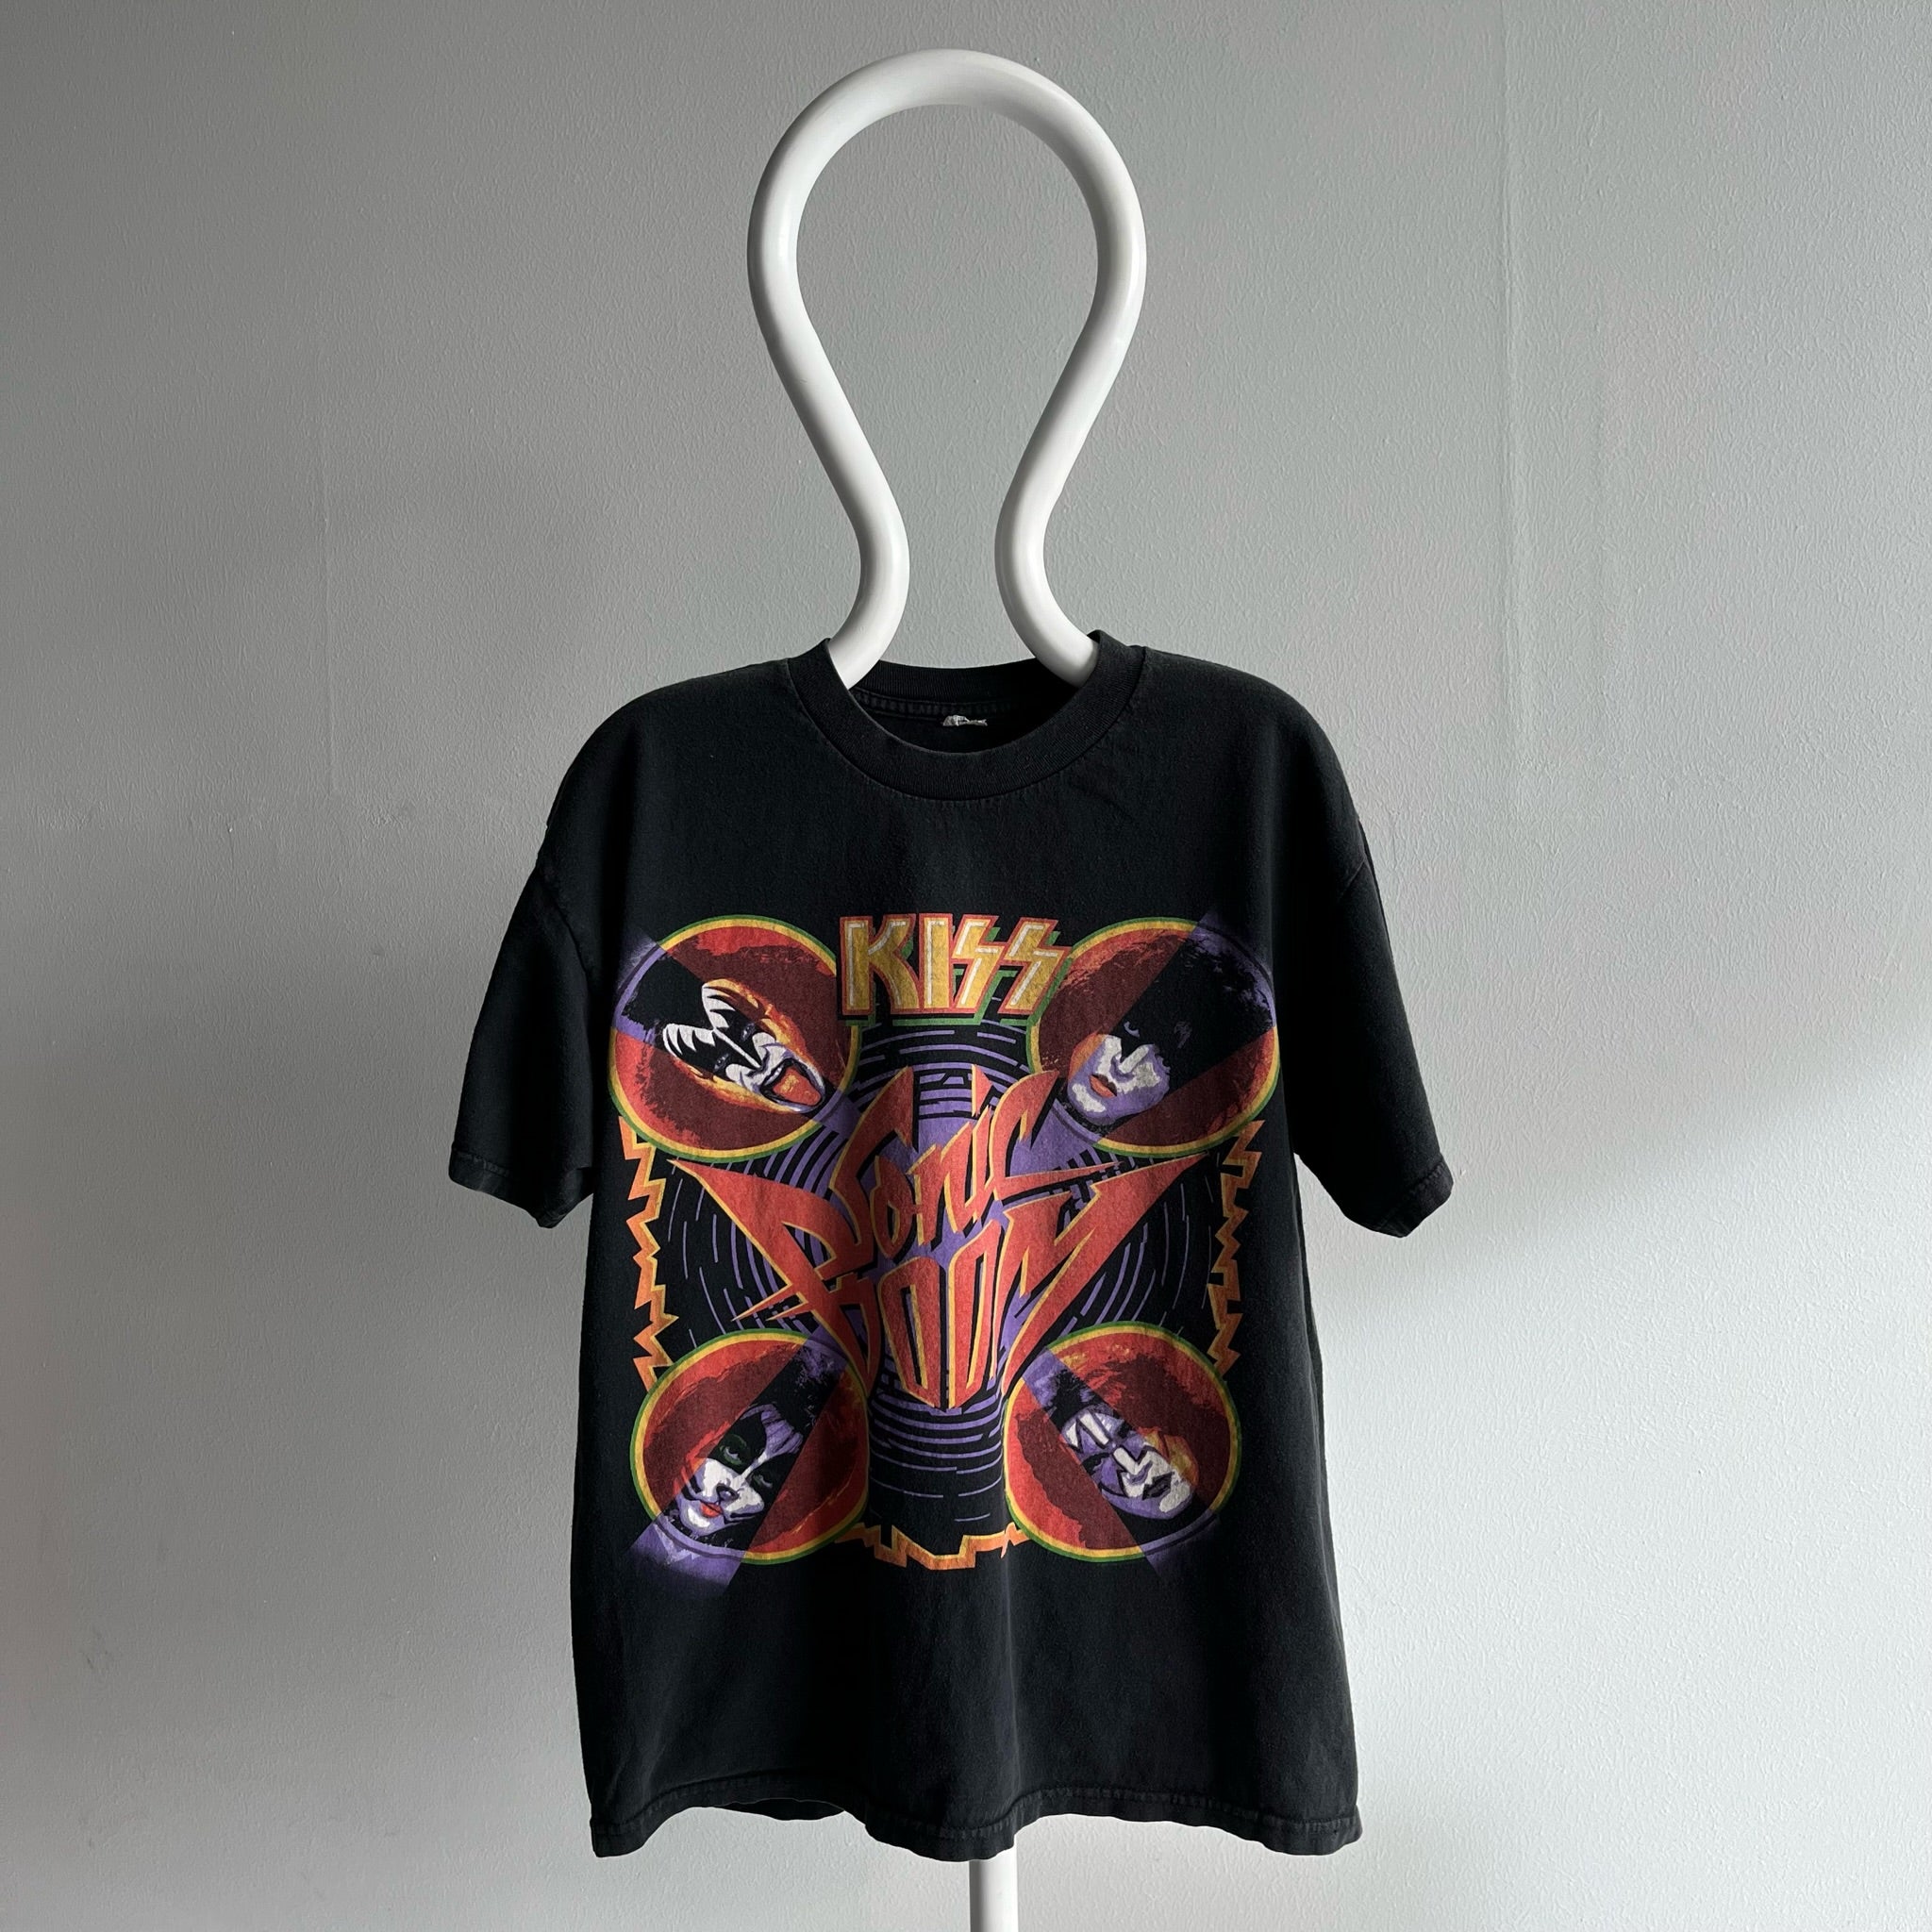 2009 Kiss - Sonic Boom - T-Shirt (not yet technically vintage)